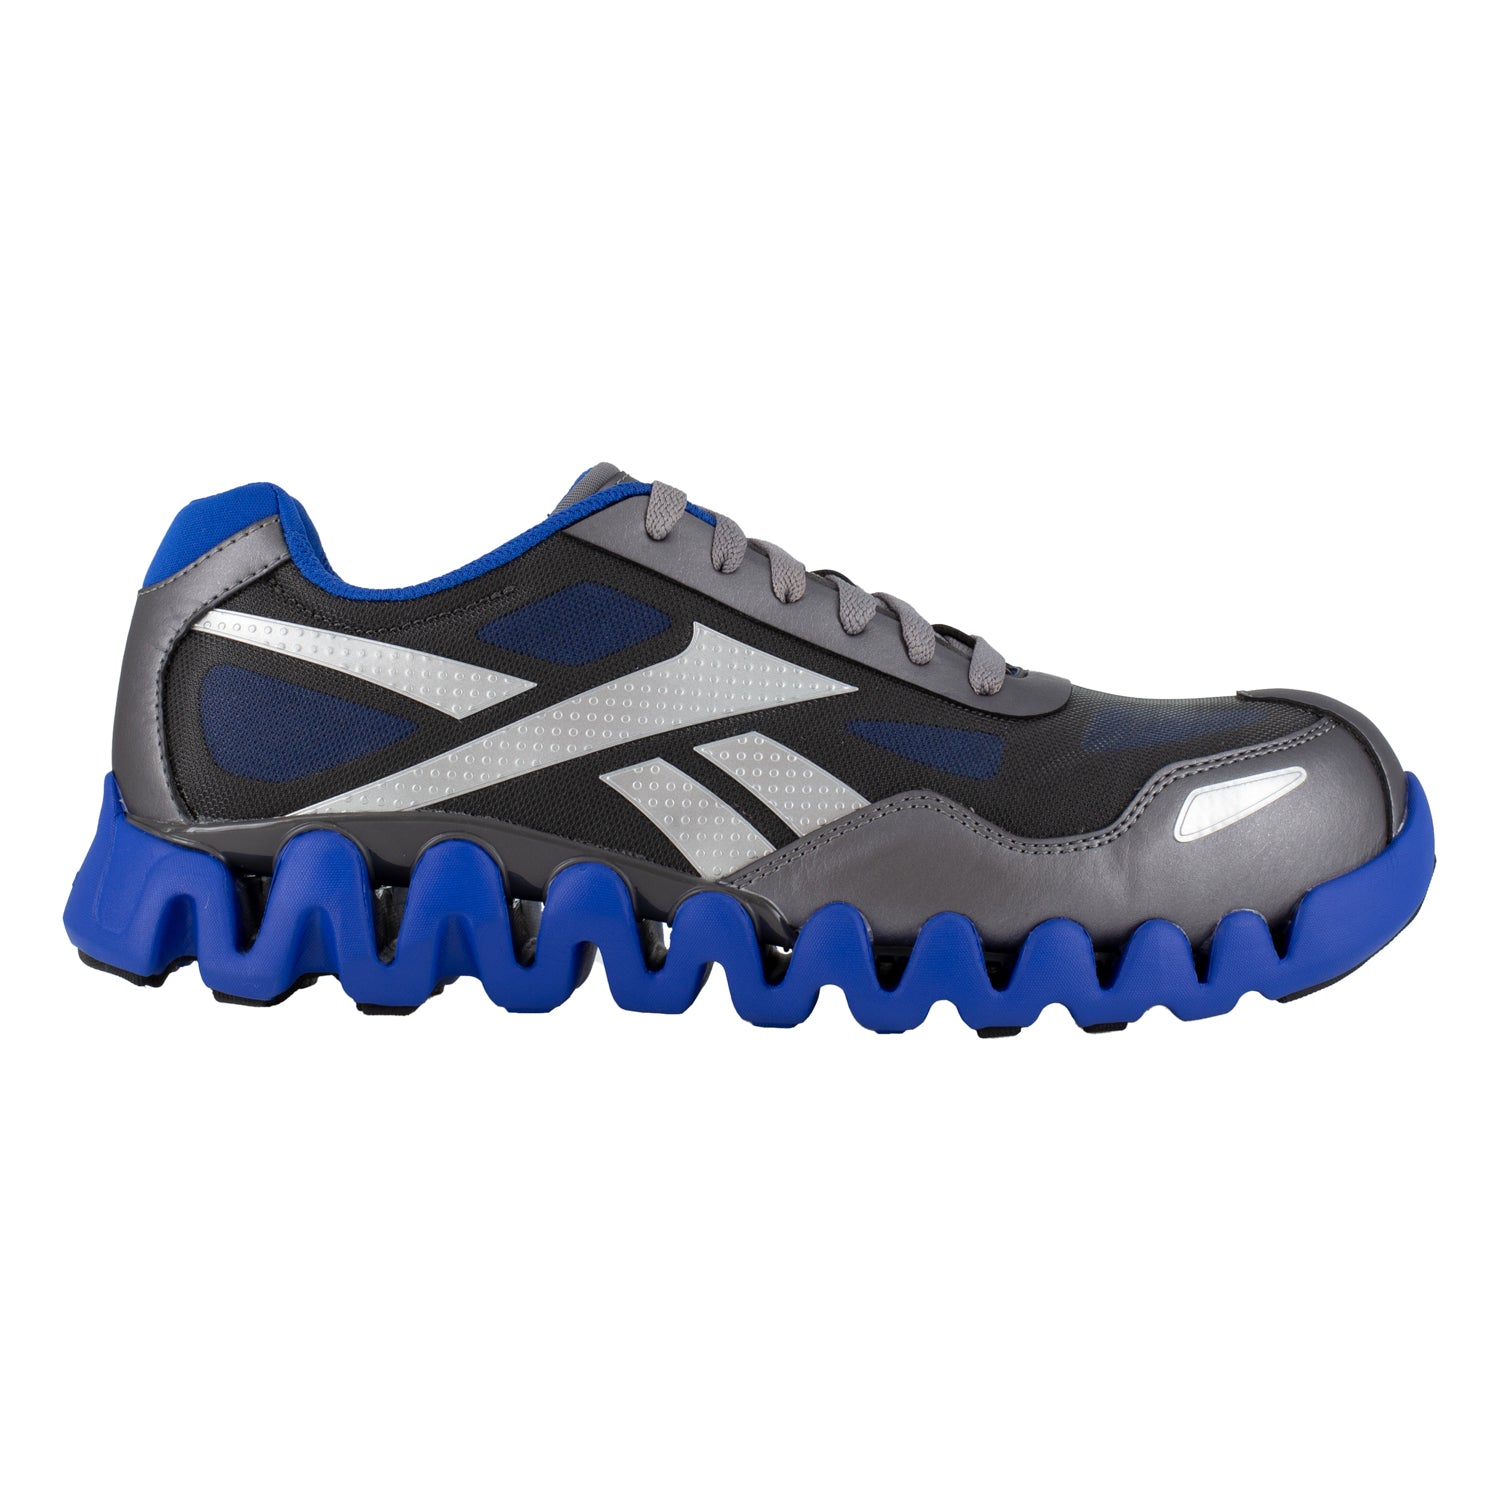 Company Work Athletic Mesh CT Pulse – The Mens Western Grey/Blue Shoes Zig Reebok